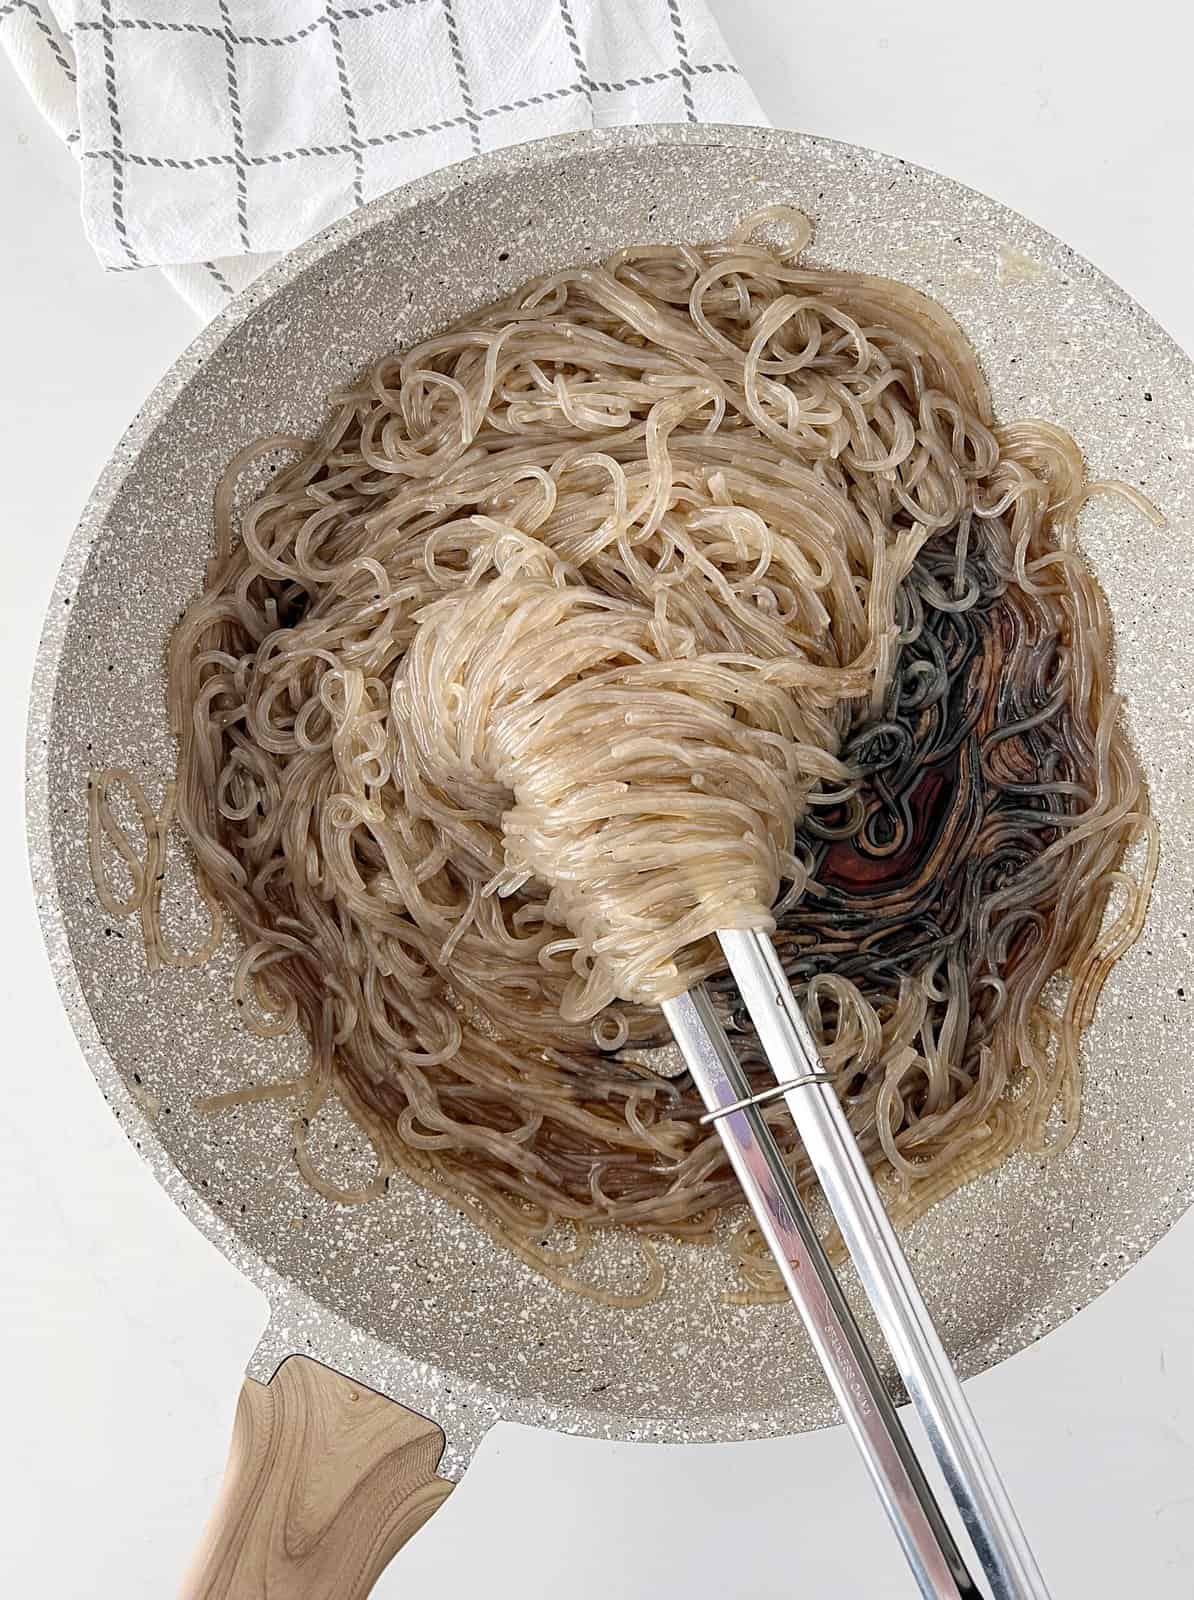 Pan of noodles with sauce 